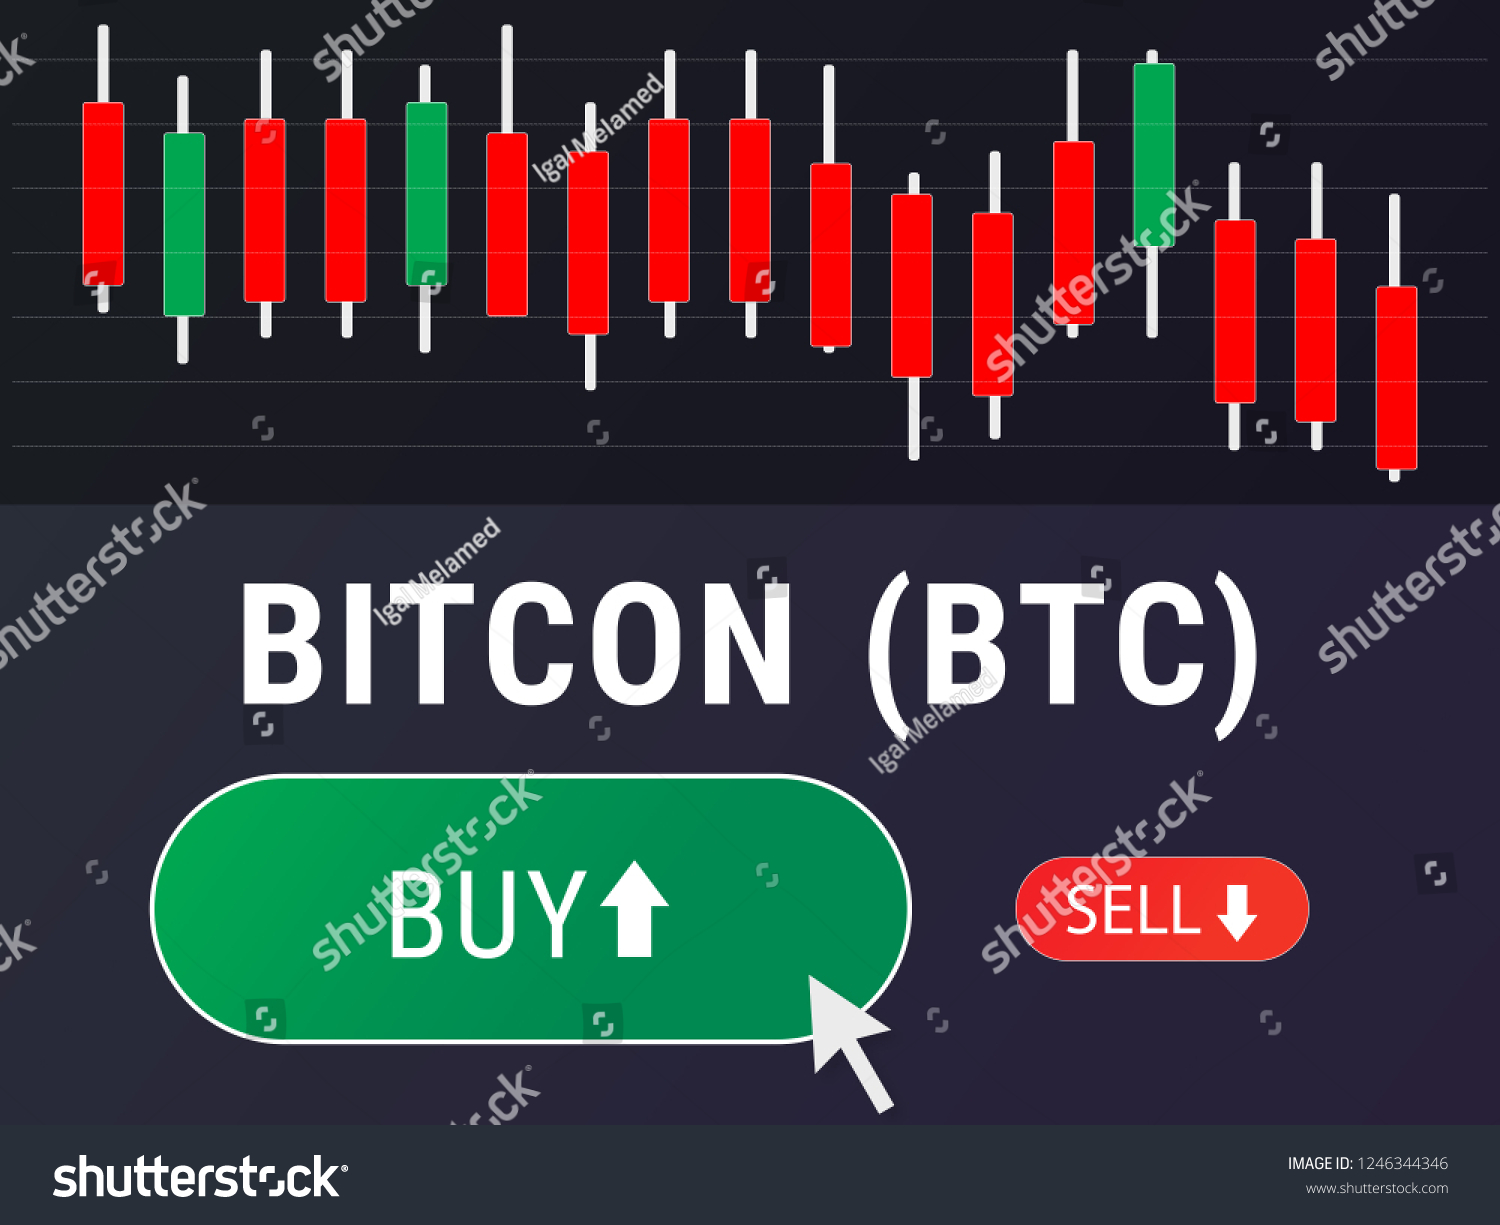 What Was The Lowest Price To Buy Bitcoin / Nash Buy And ...